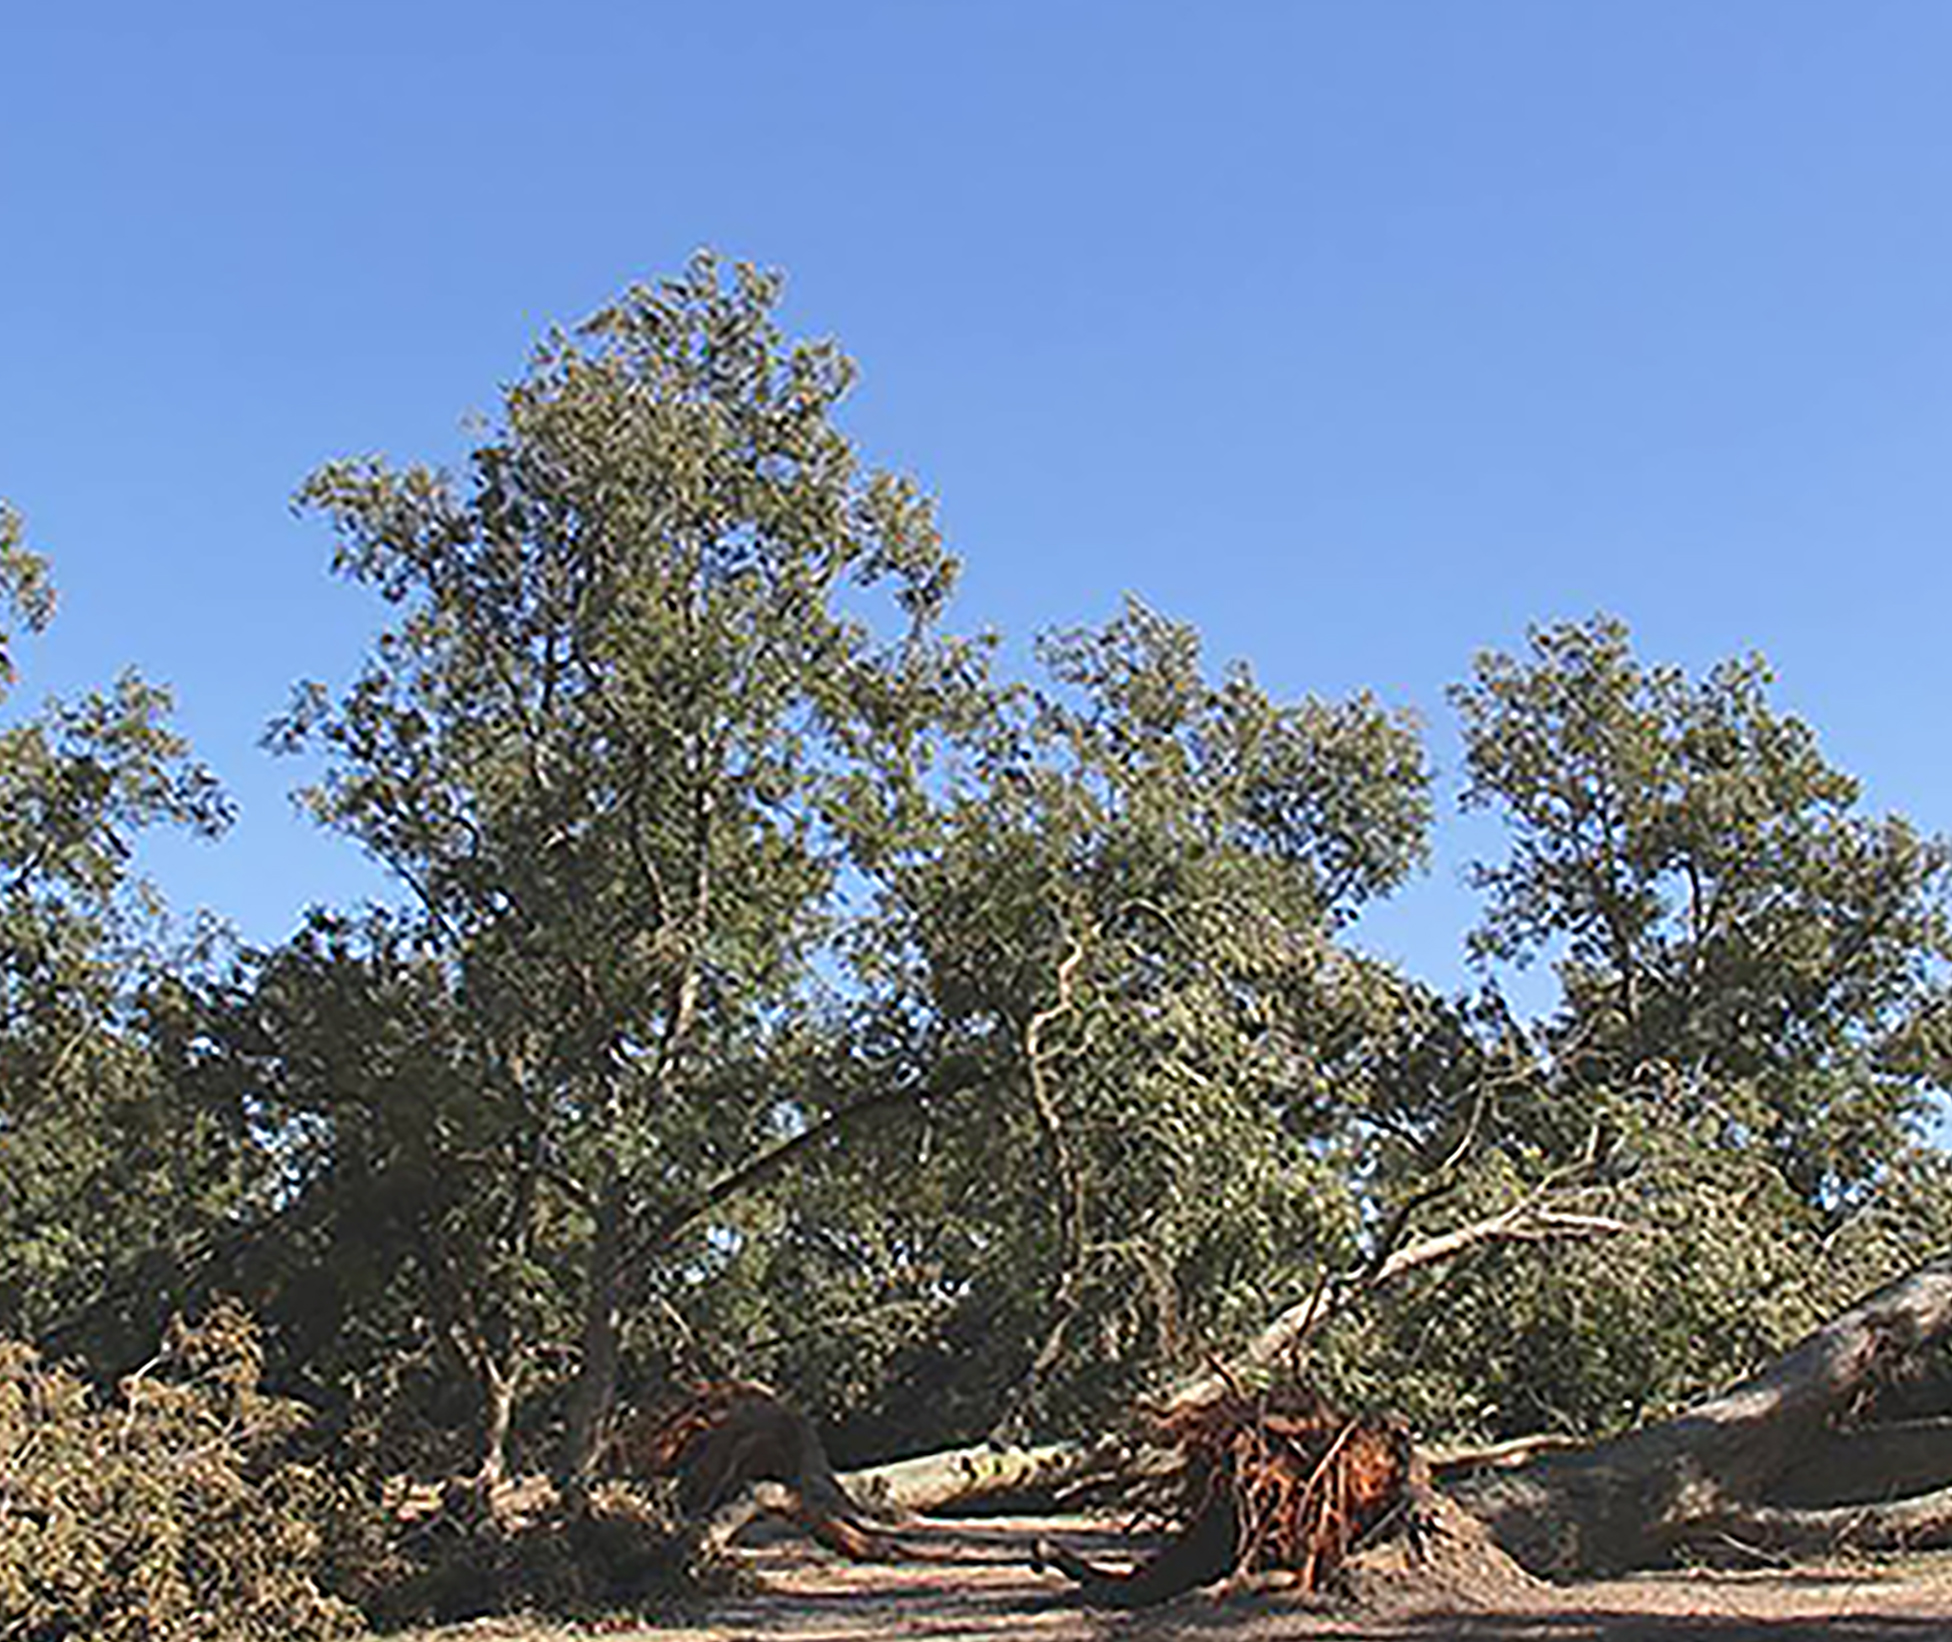 Pecan orchard damaged in Screven County.